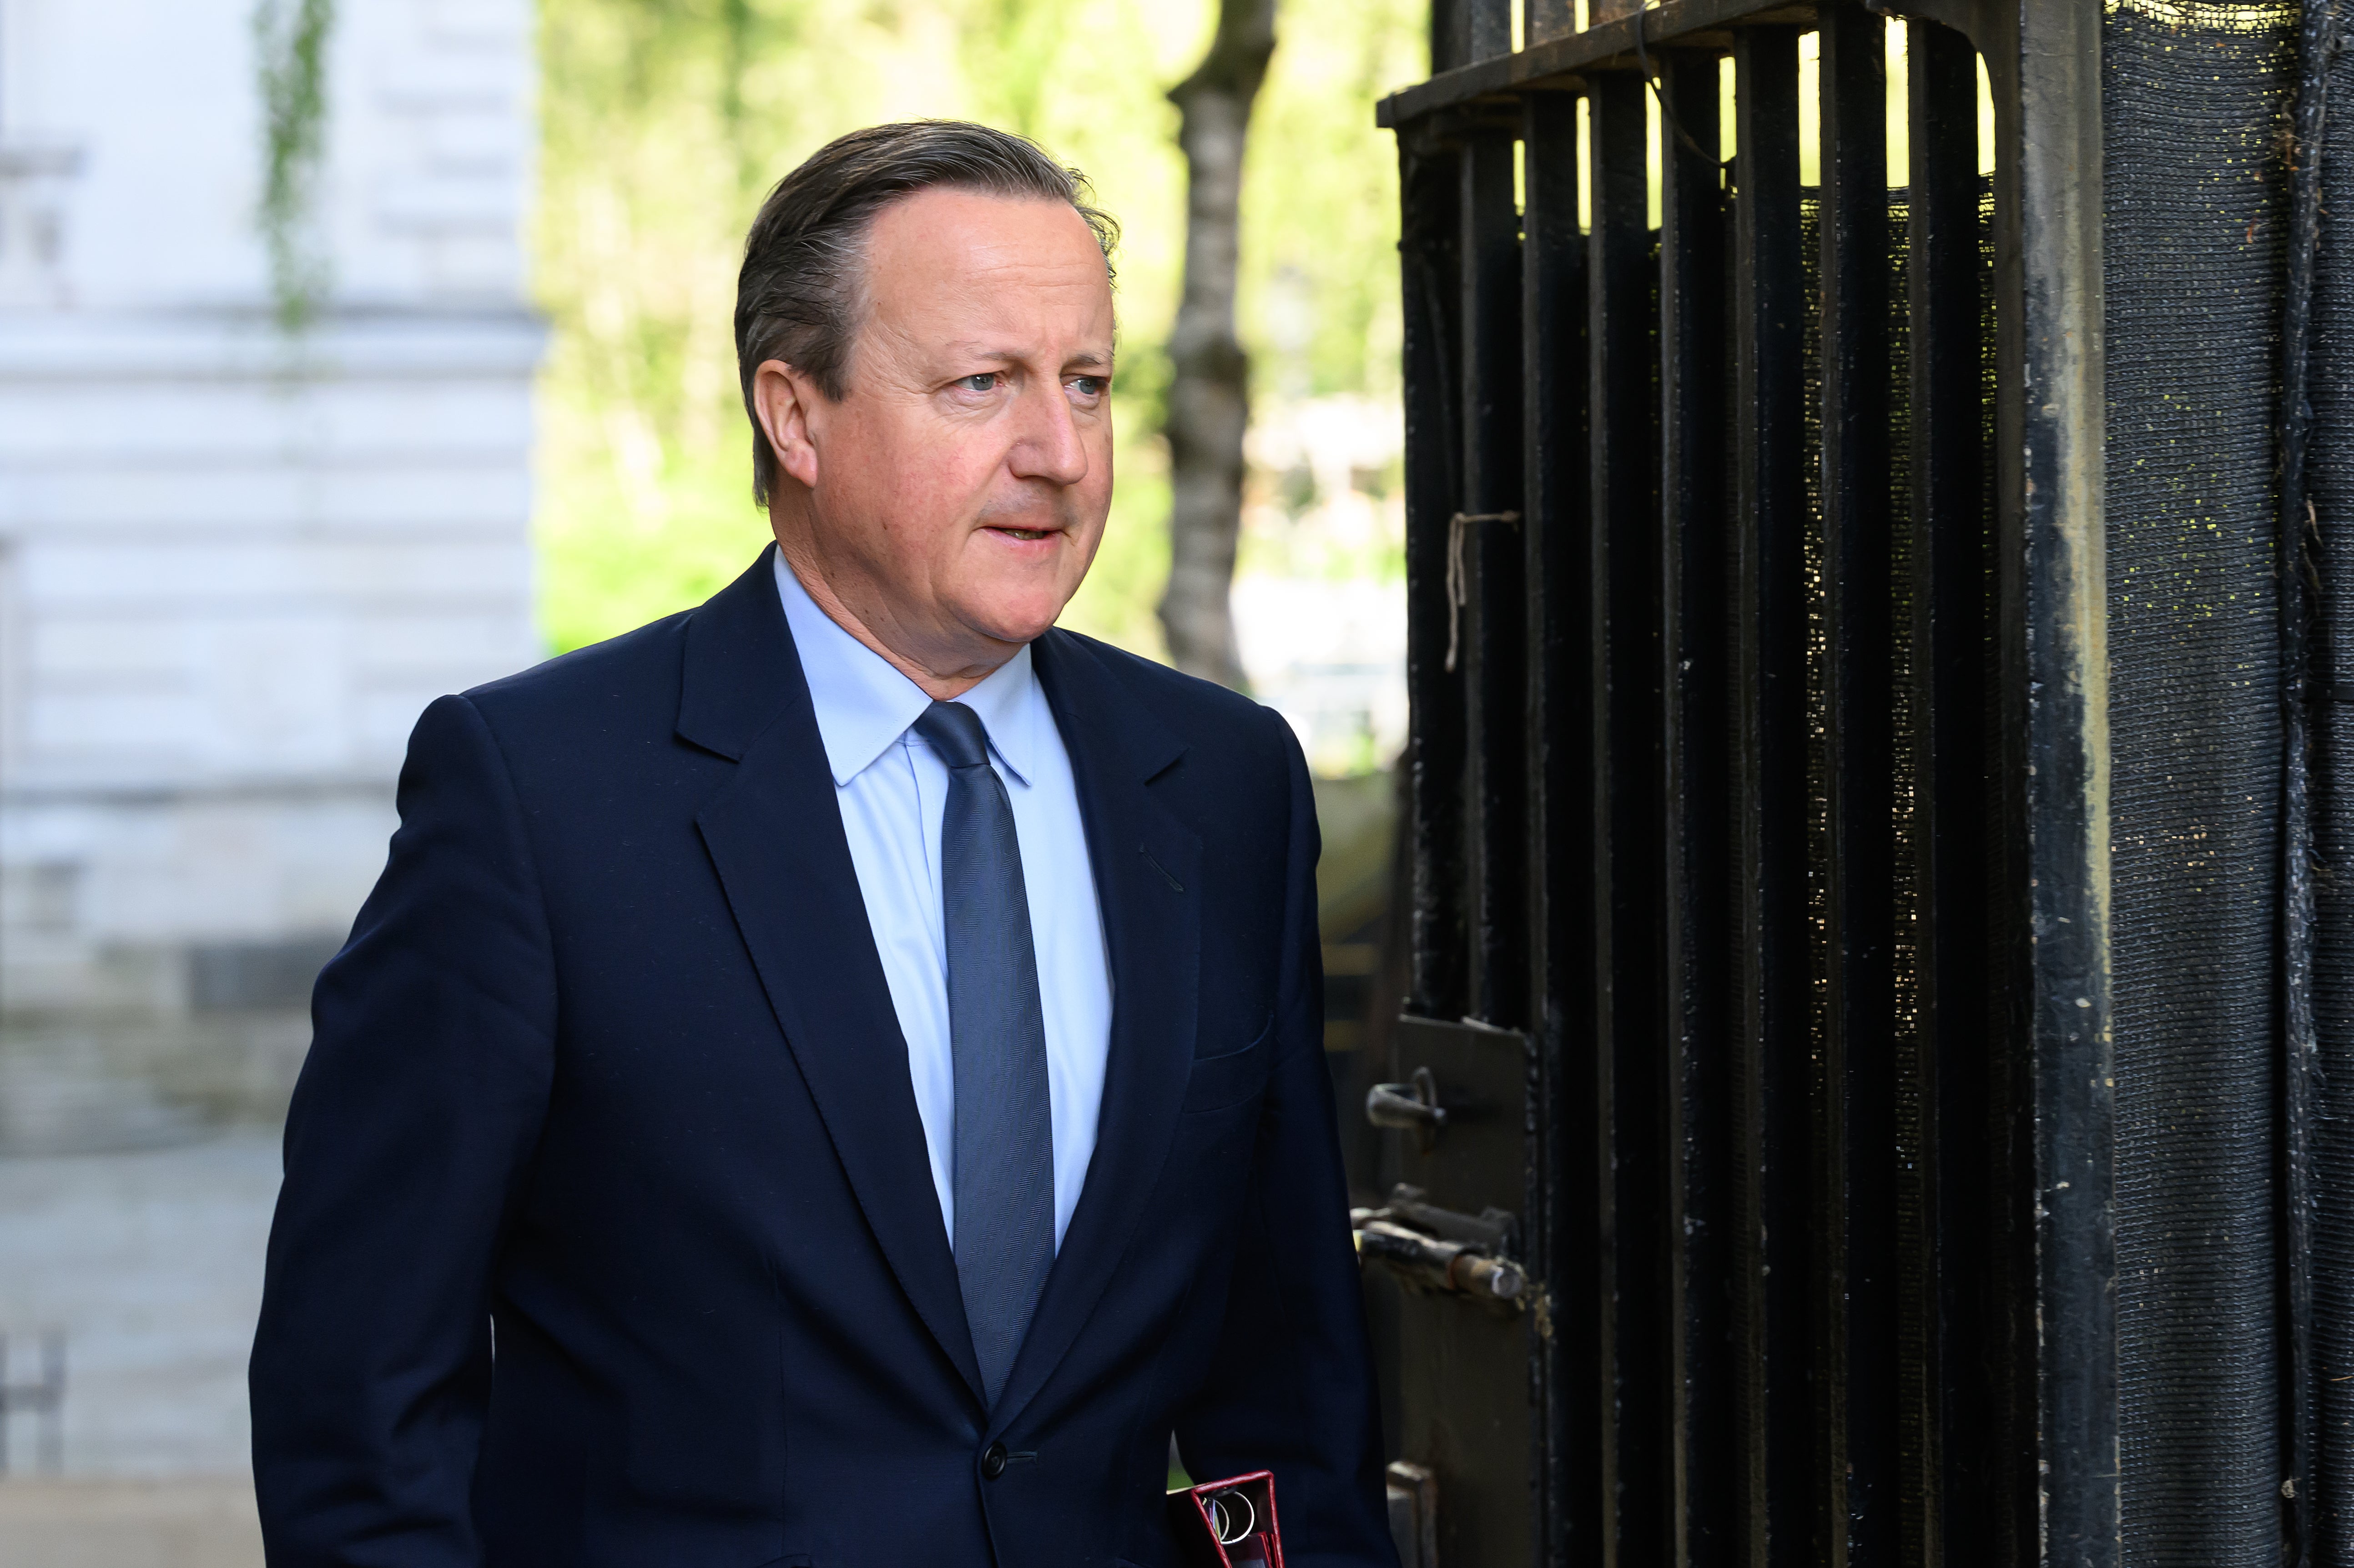 Cameron had been out of office for almost a decade when he lobbied ministers